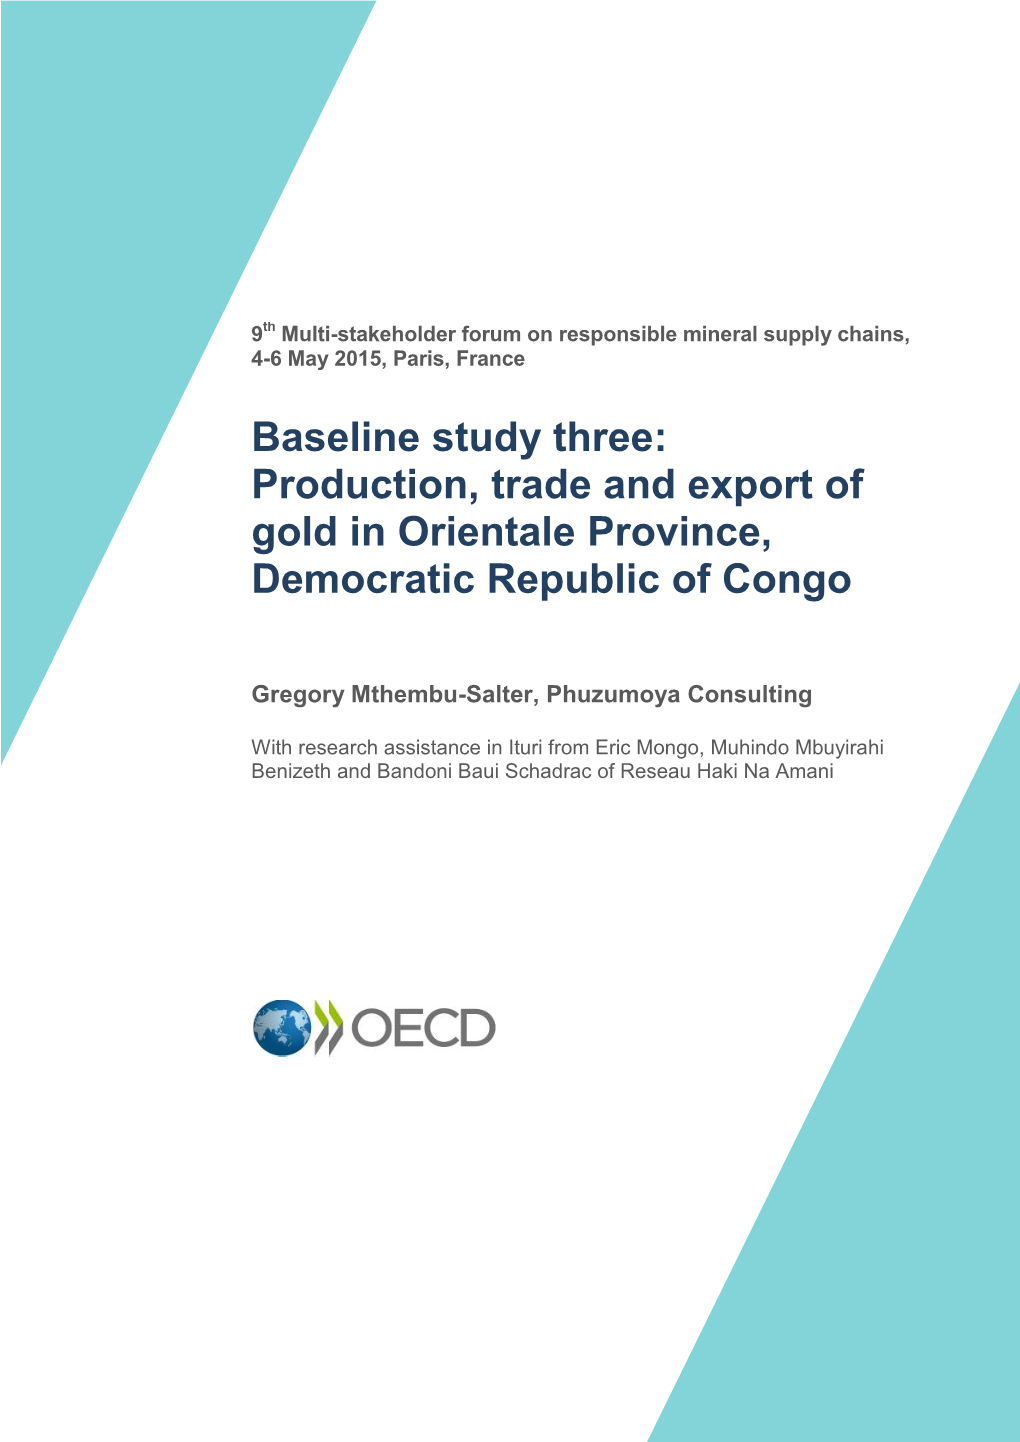 Baseline Study Three: Production, Trade and Export of Gold in Orientale Province, Democratic Republic of Congo